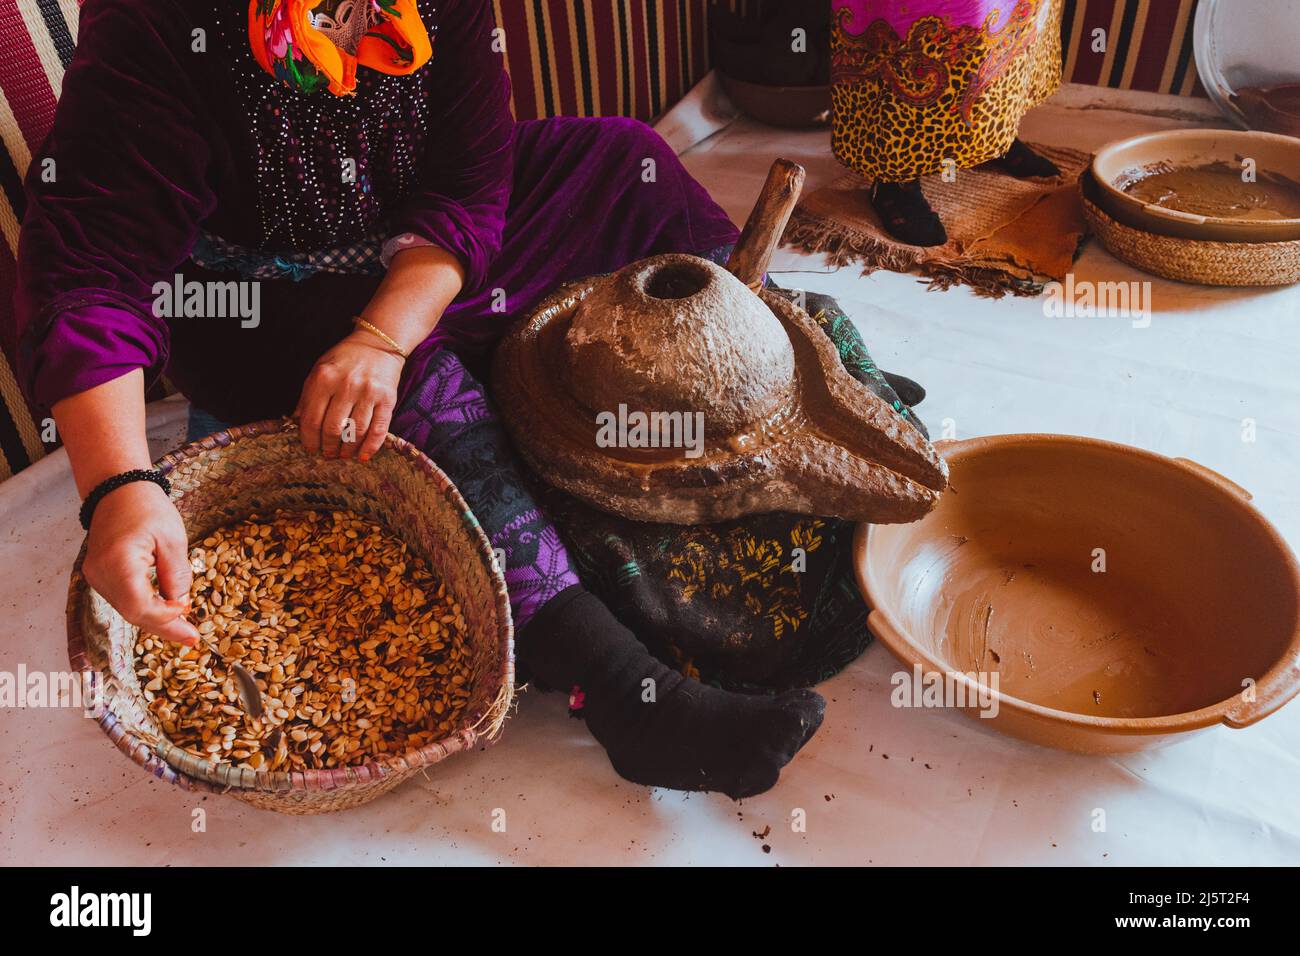 Women making argan oil, Morocco. Holding seeds with her hands. Real people doing real things. Africa Stock Photo